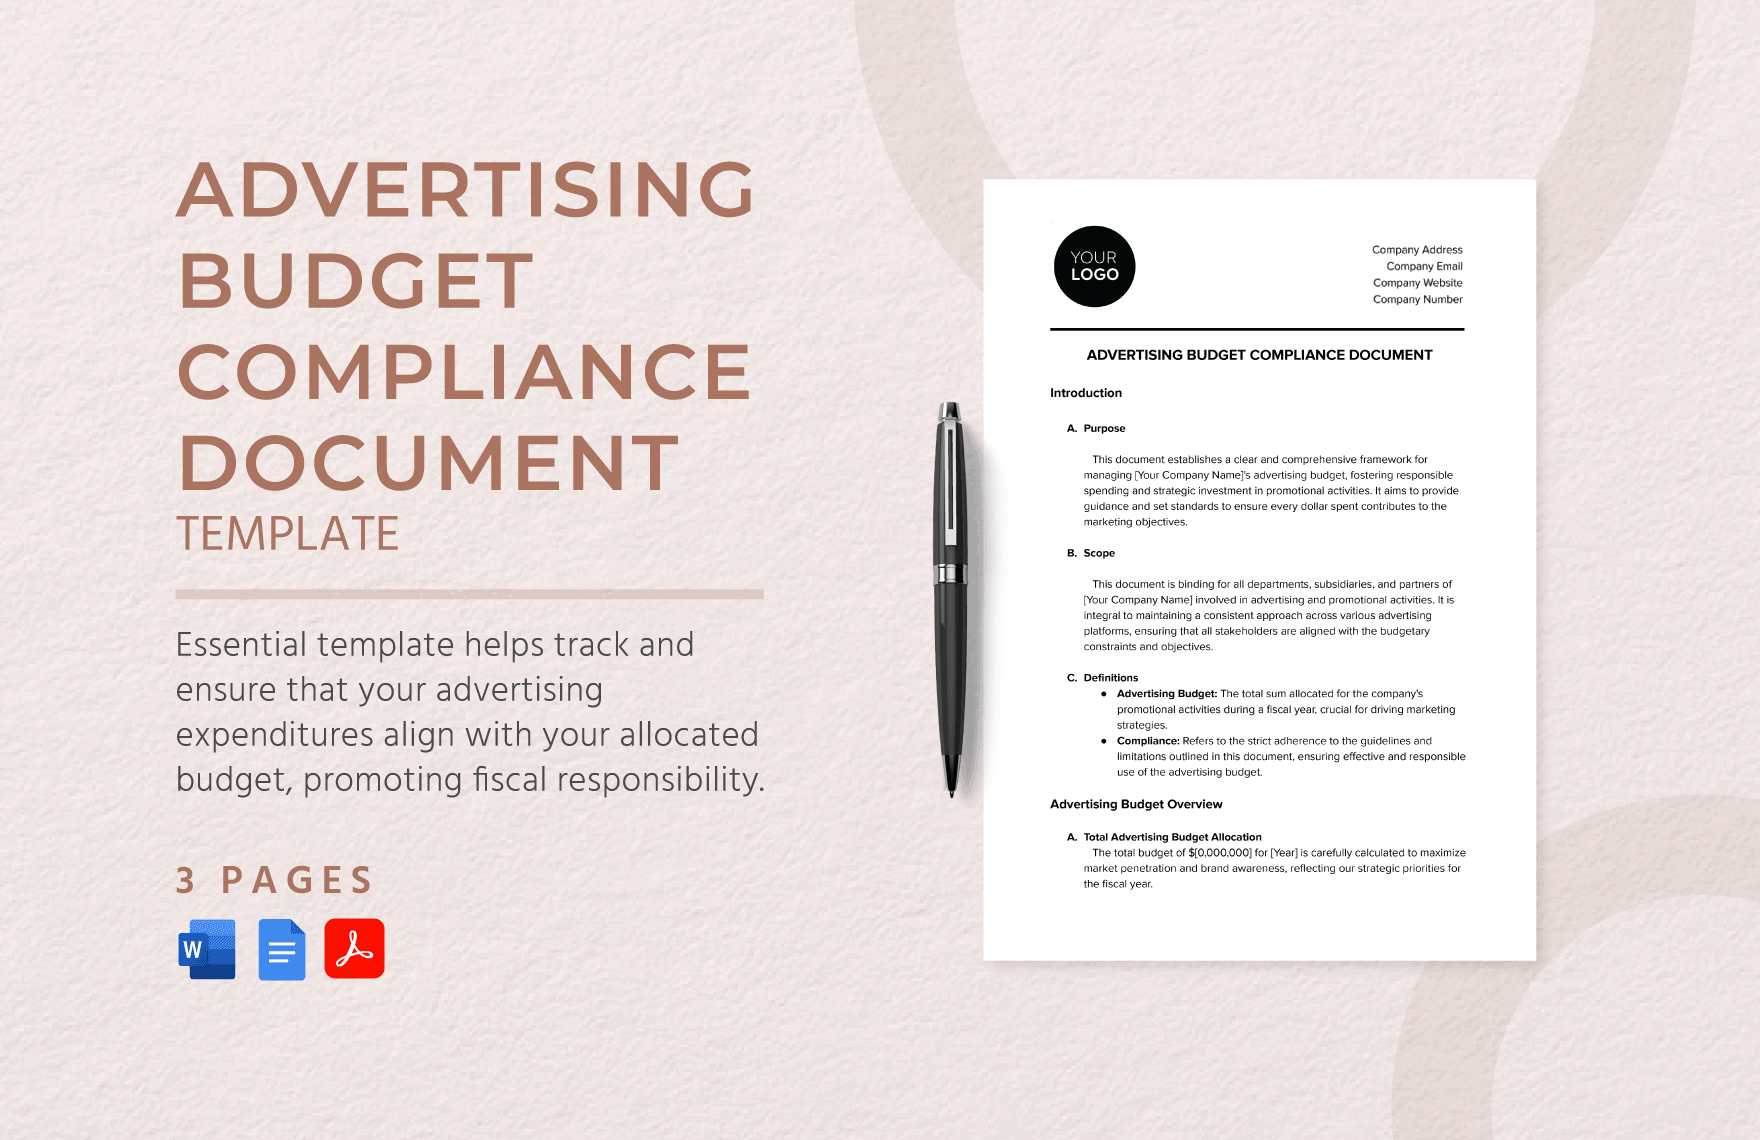 Advertising Budget Compliance Document Template in Word, Google Docs, PDF